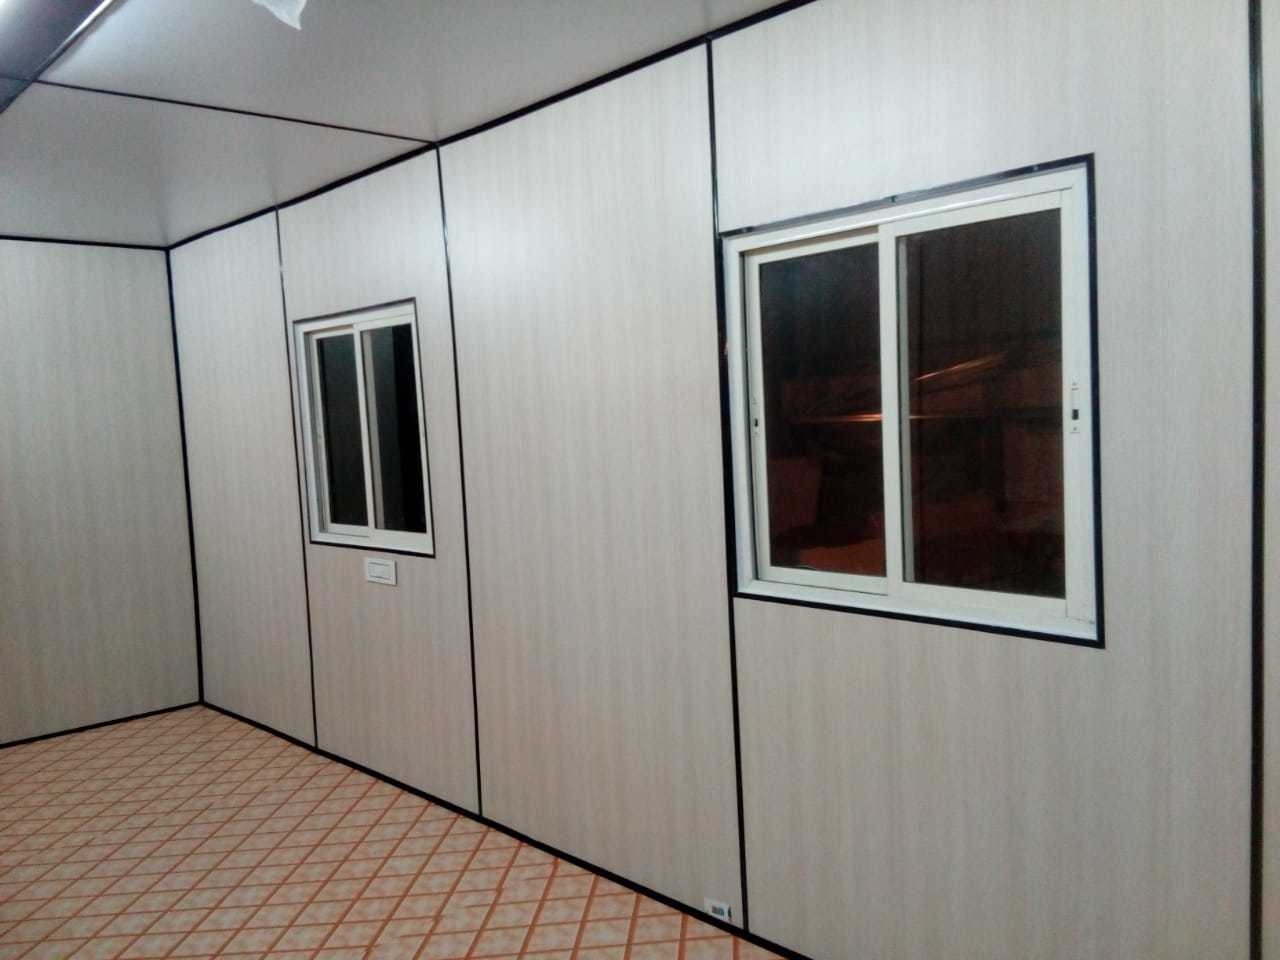 Site Office Cabins